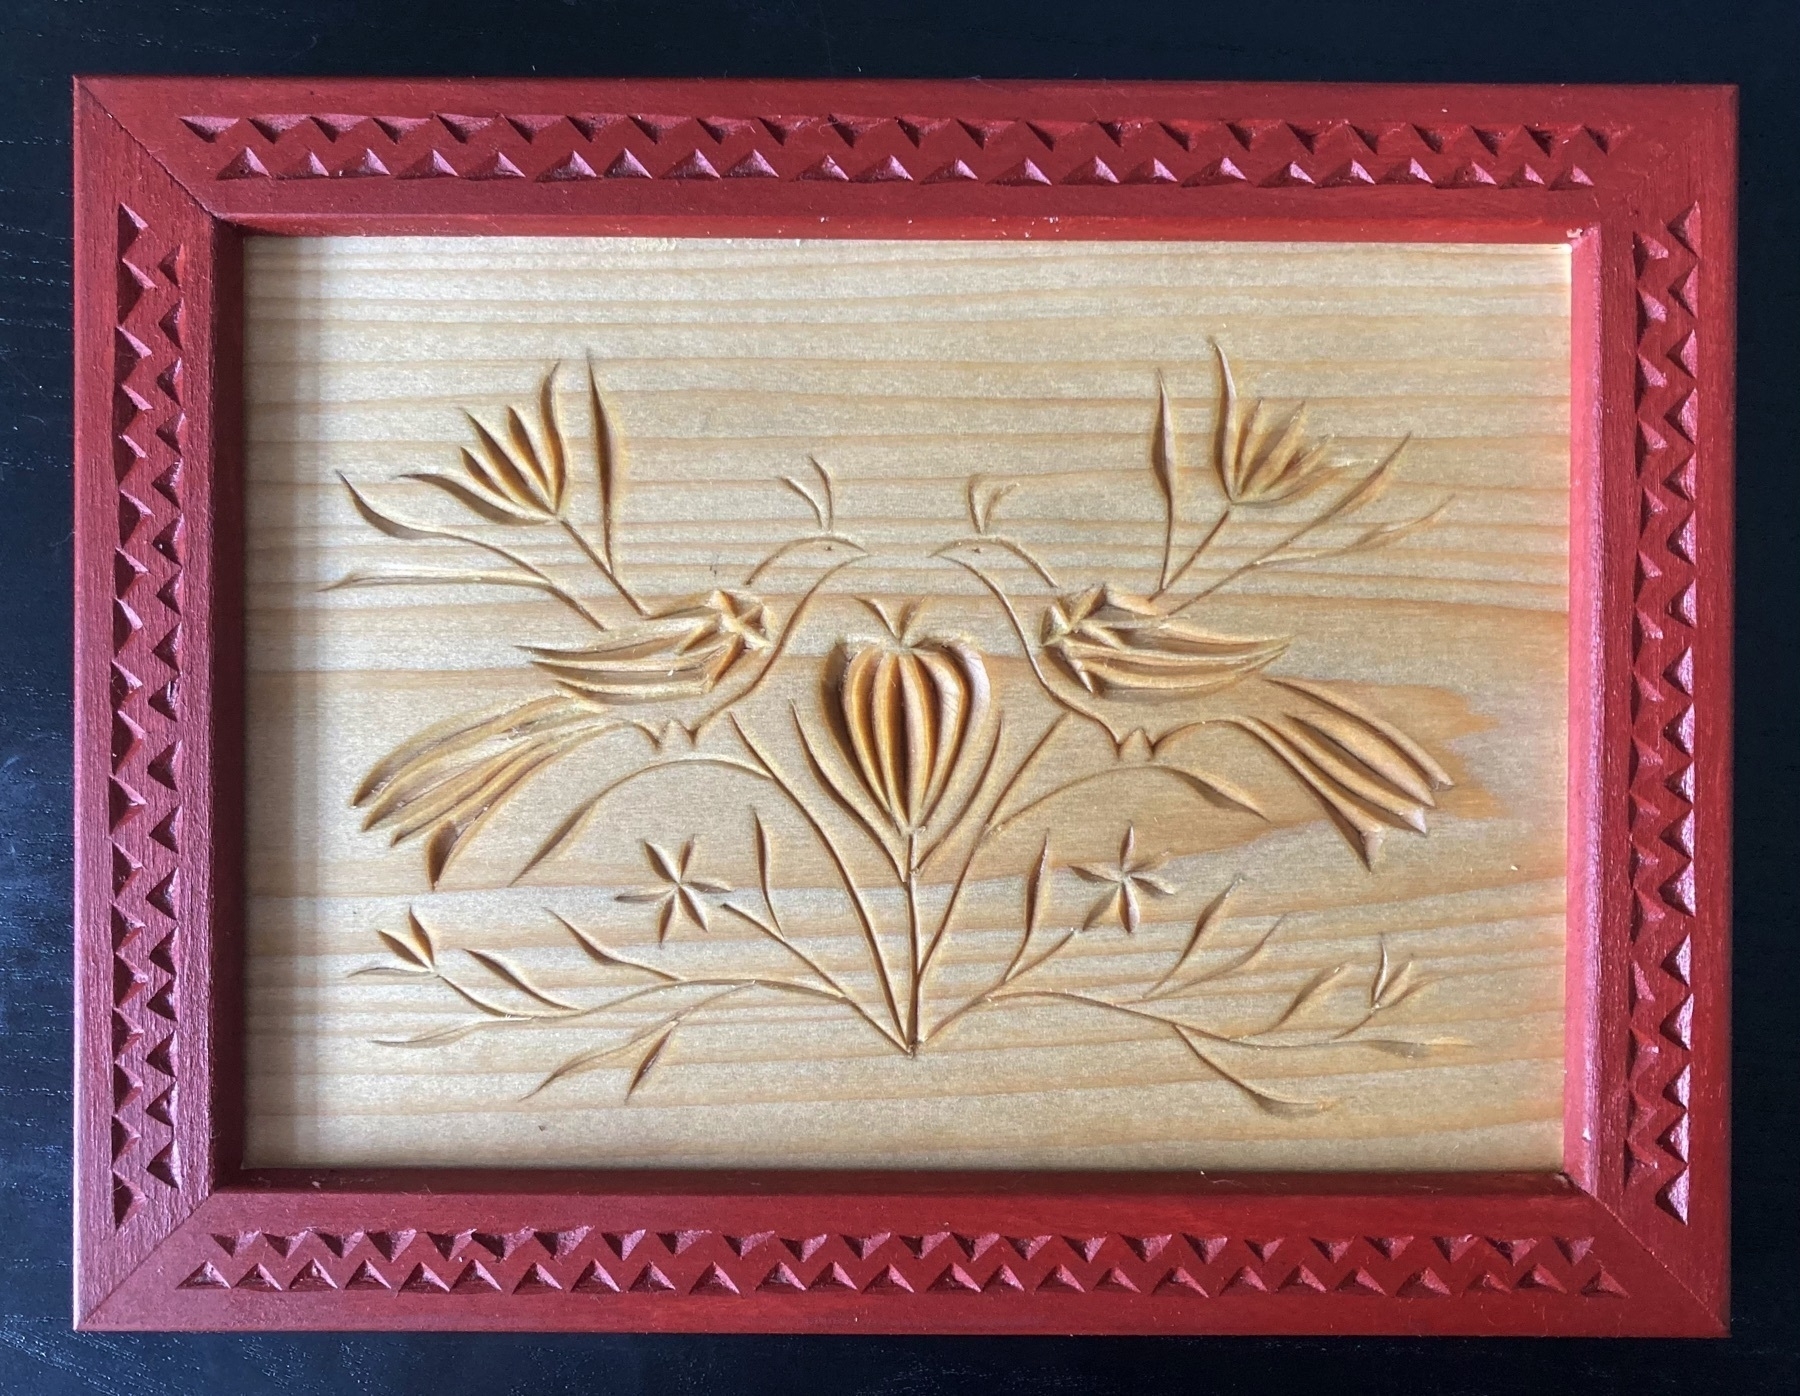 carving of birds facing each other over a stylized lily; flowers protecting them; a carved frame, painted red